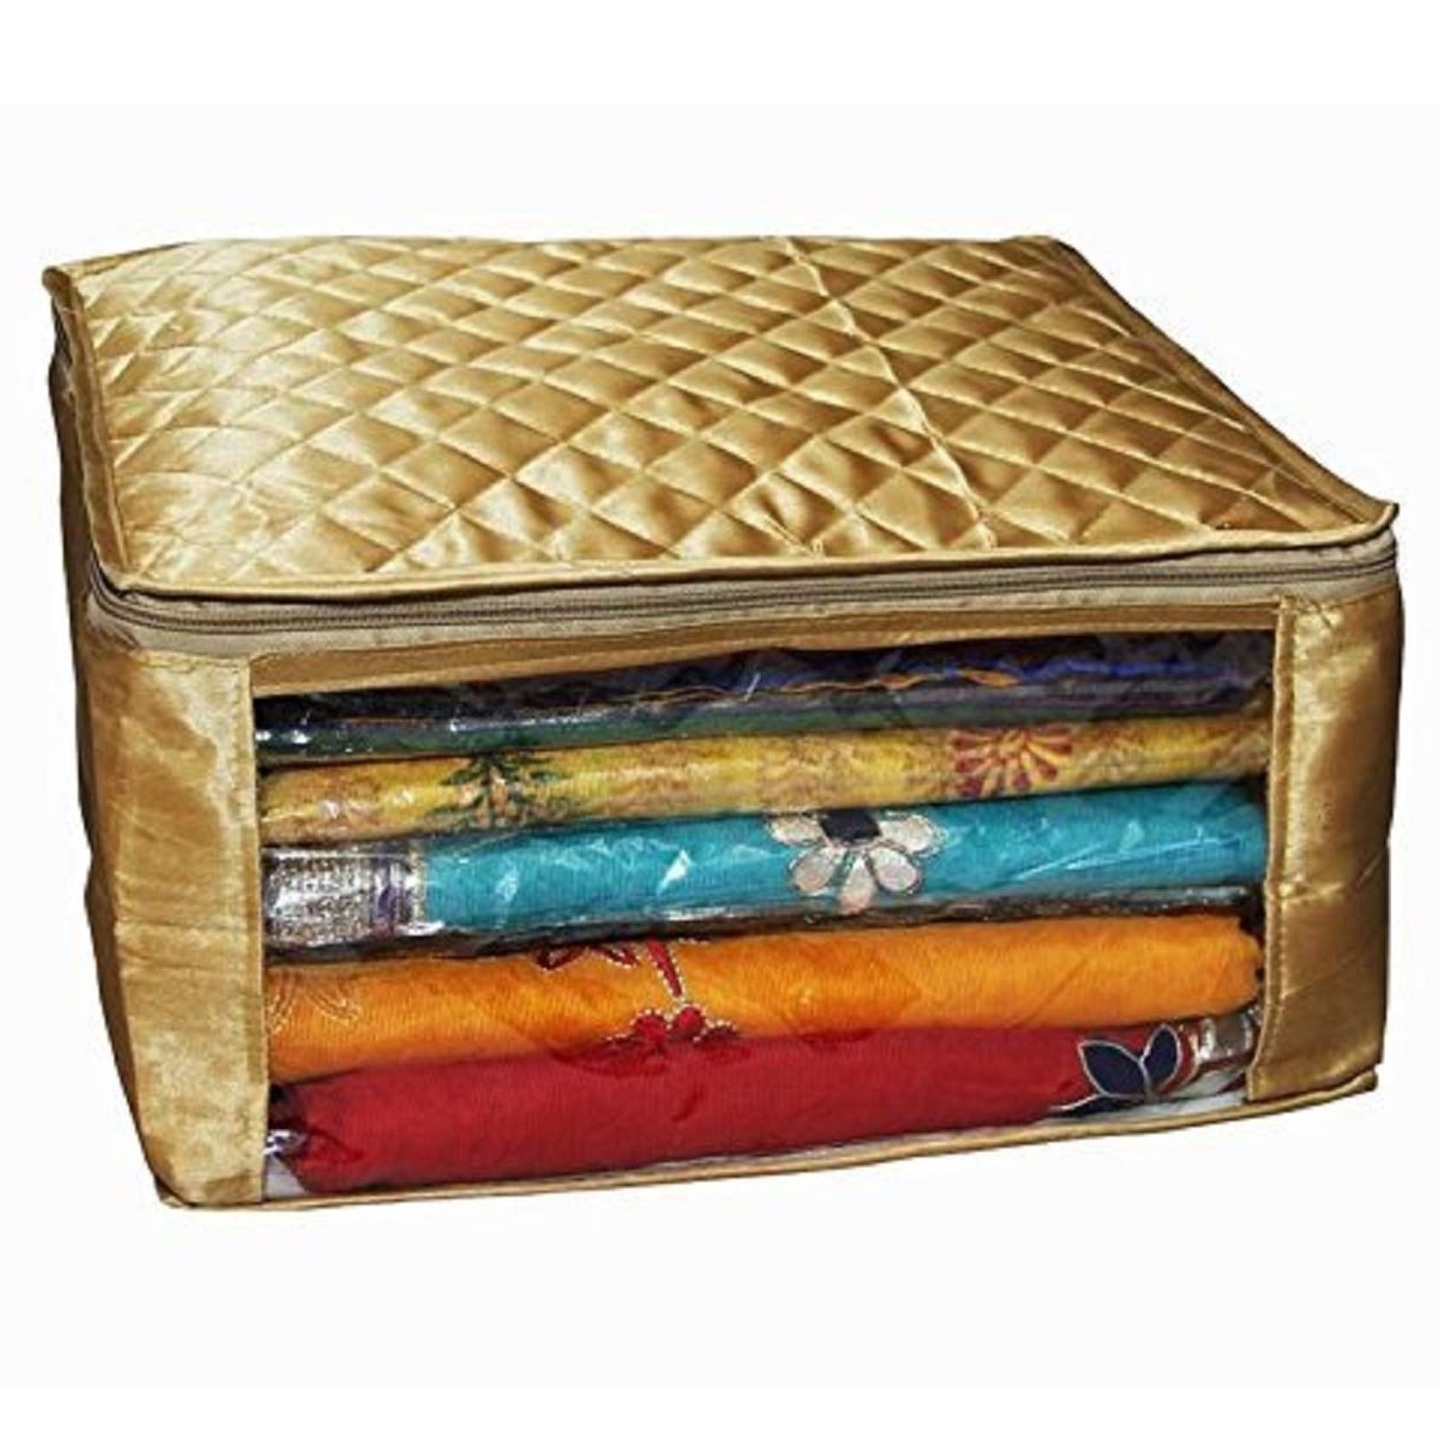 3 Layered Quilted Premium Satin Saree Cover Royal Gold